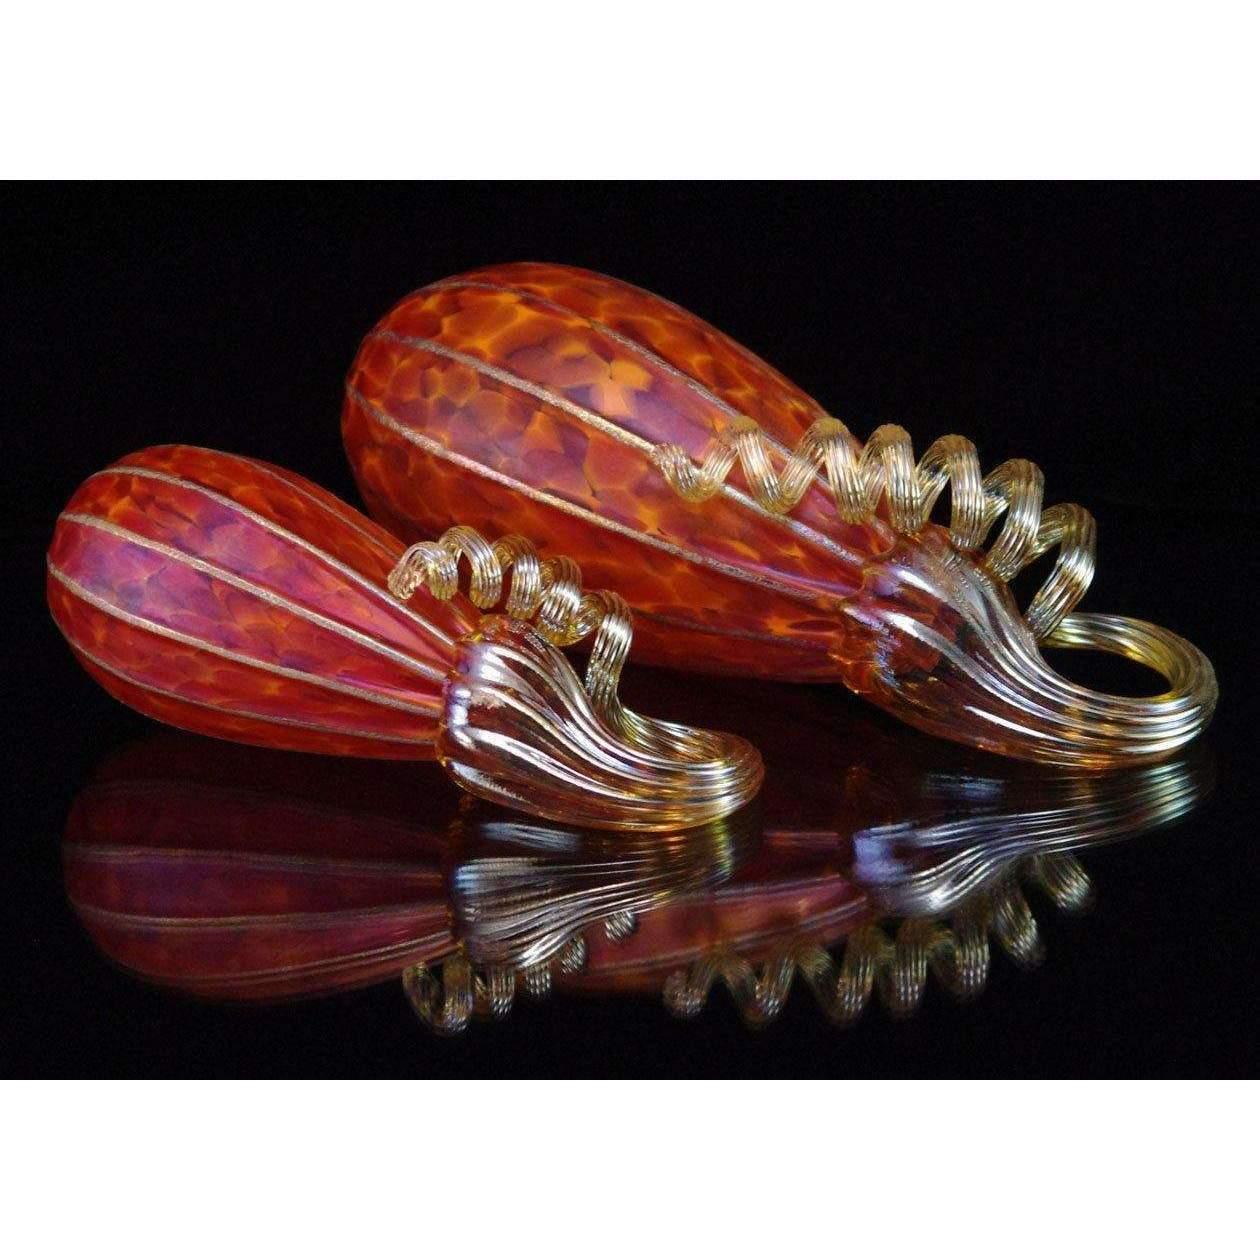 Blown Glass Gourd in Sunrise Gifts Furnace Glass Works 